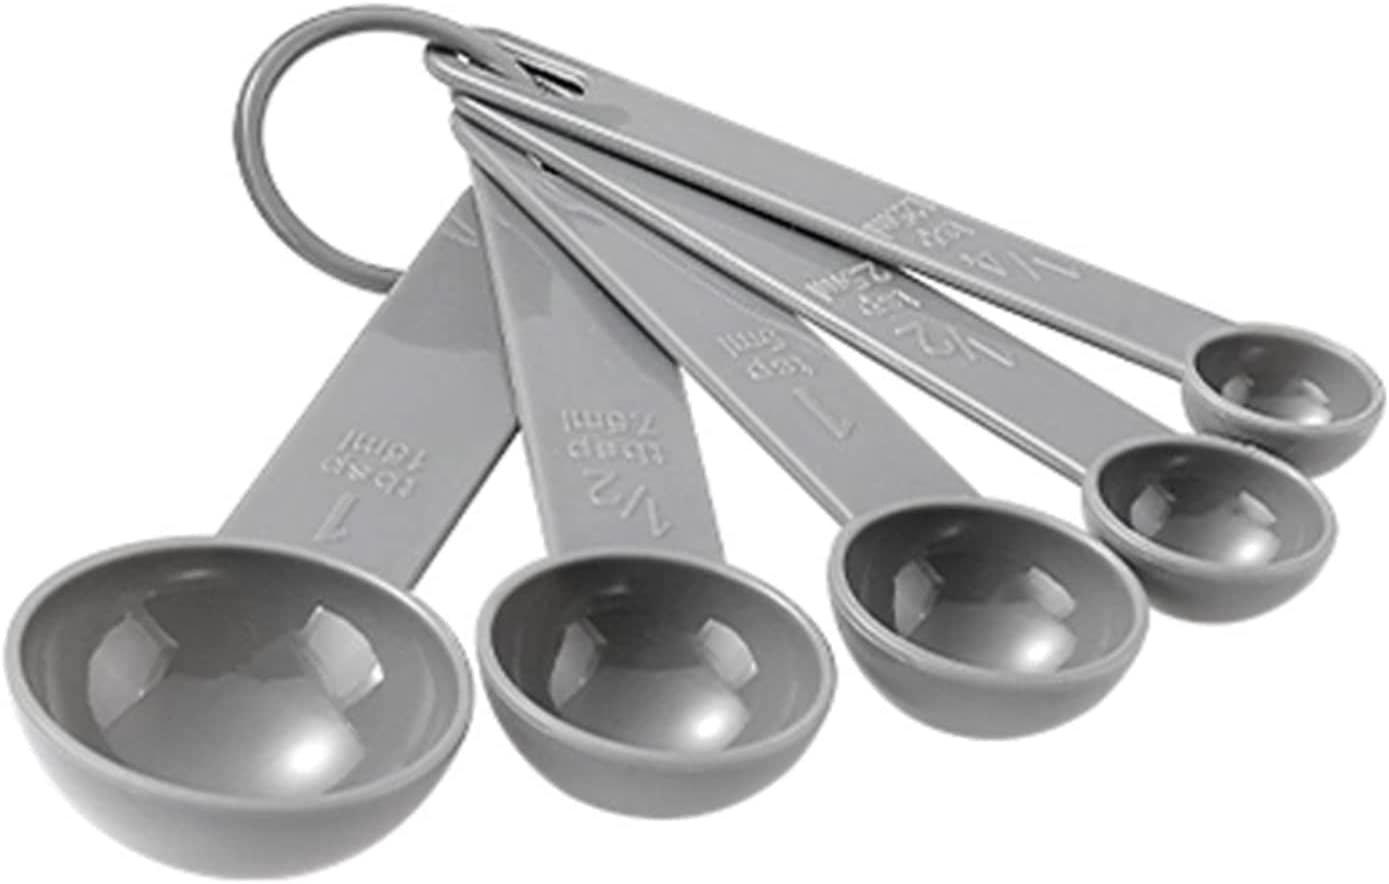 Set of 10 Colored Black White Beige Plastic Measuring Cups and Spoons Set  (Gray)